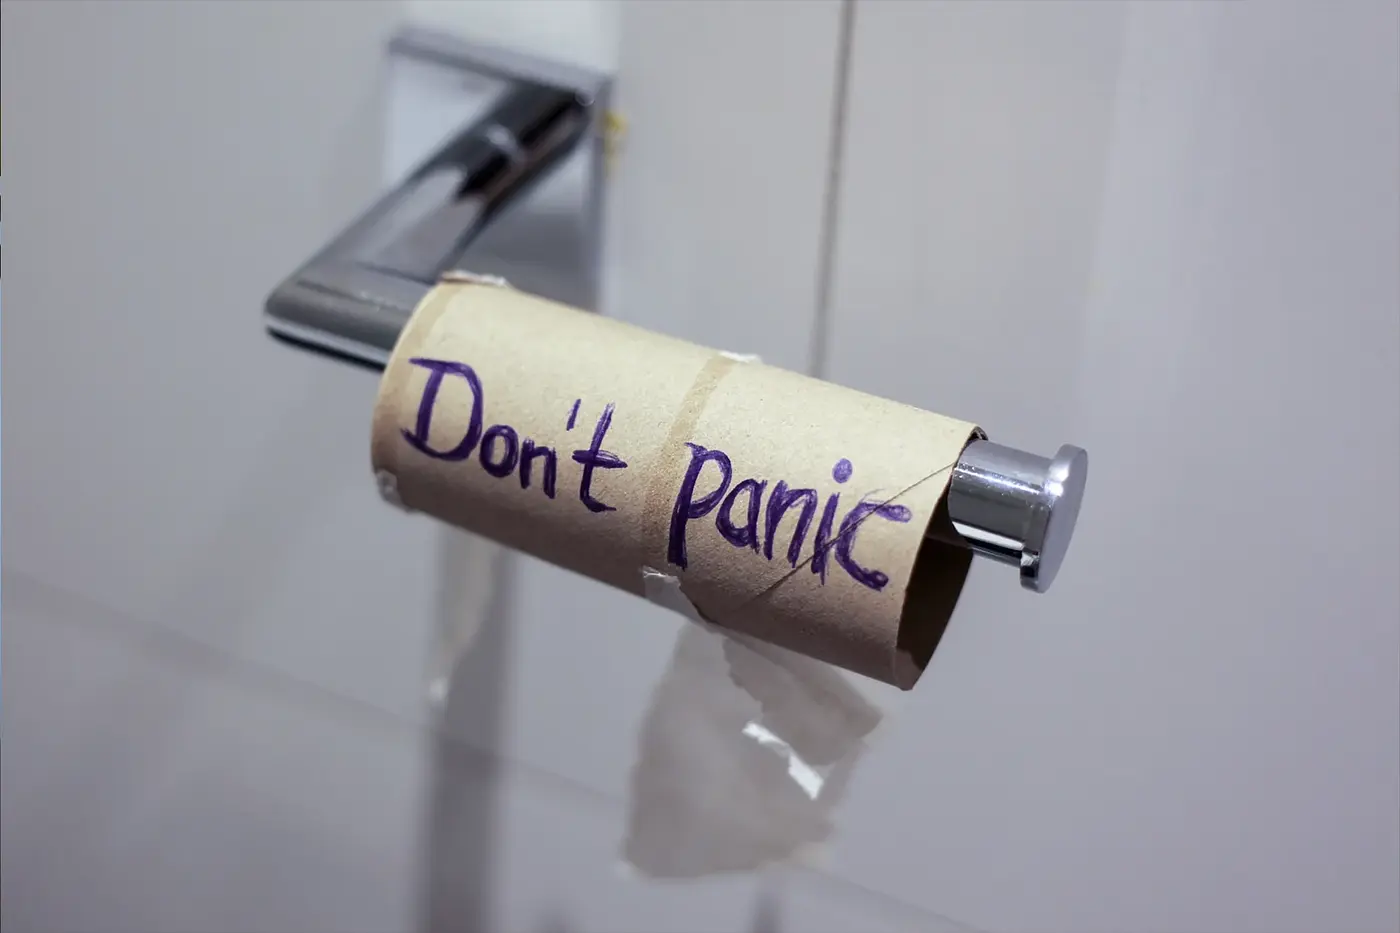 A photo of an empty toilet paper roll with the words "Don't panic" written on it.